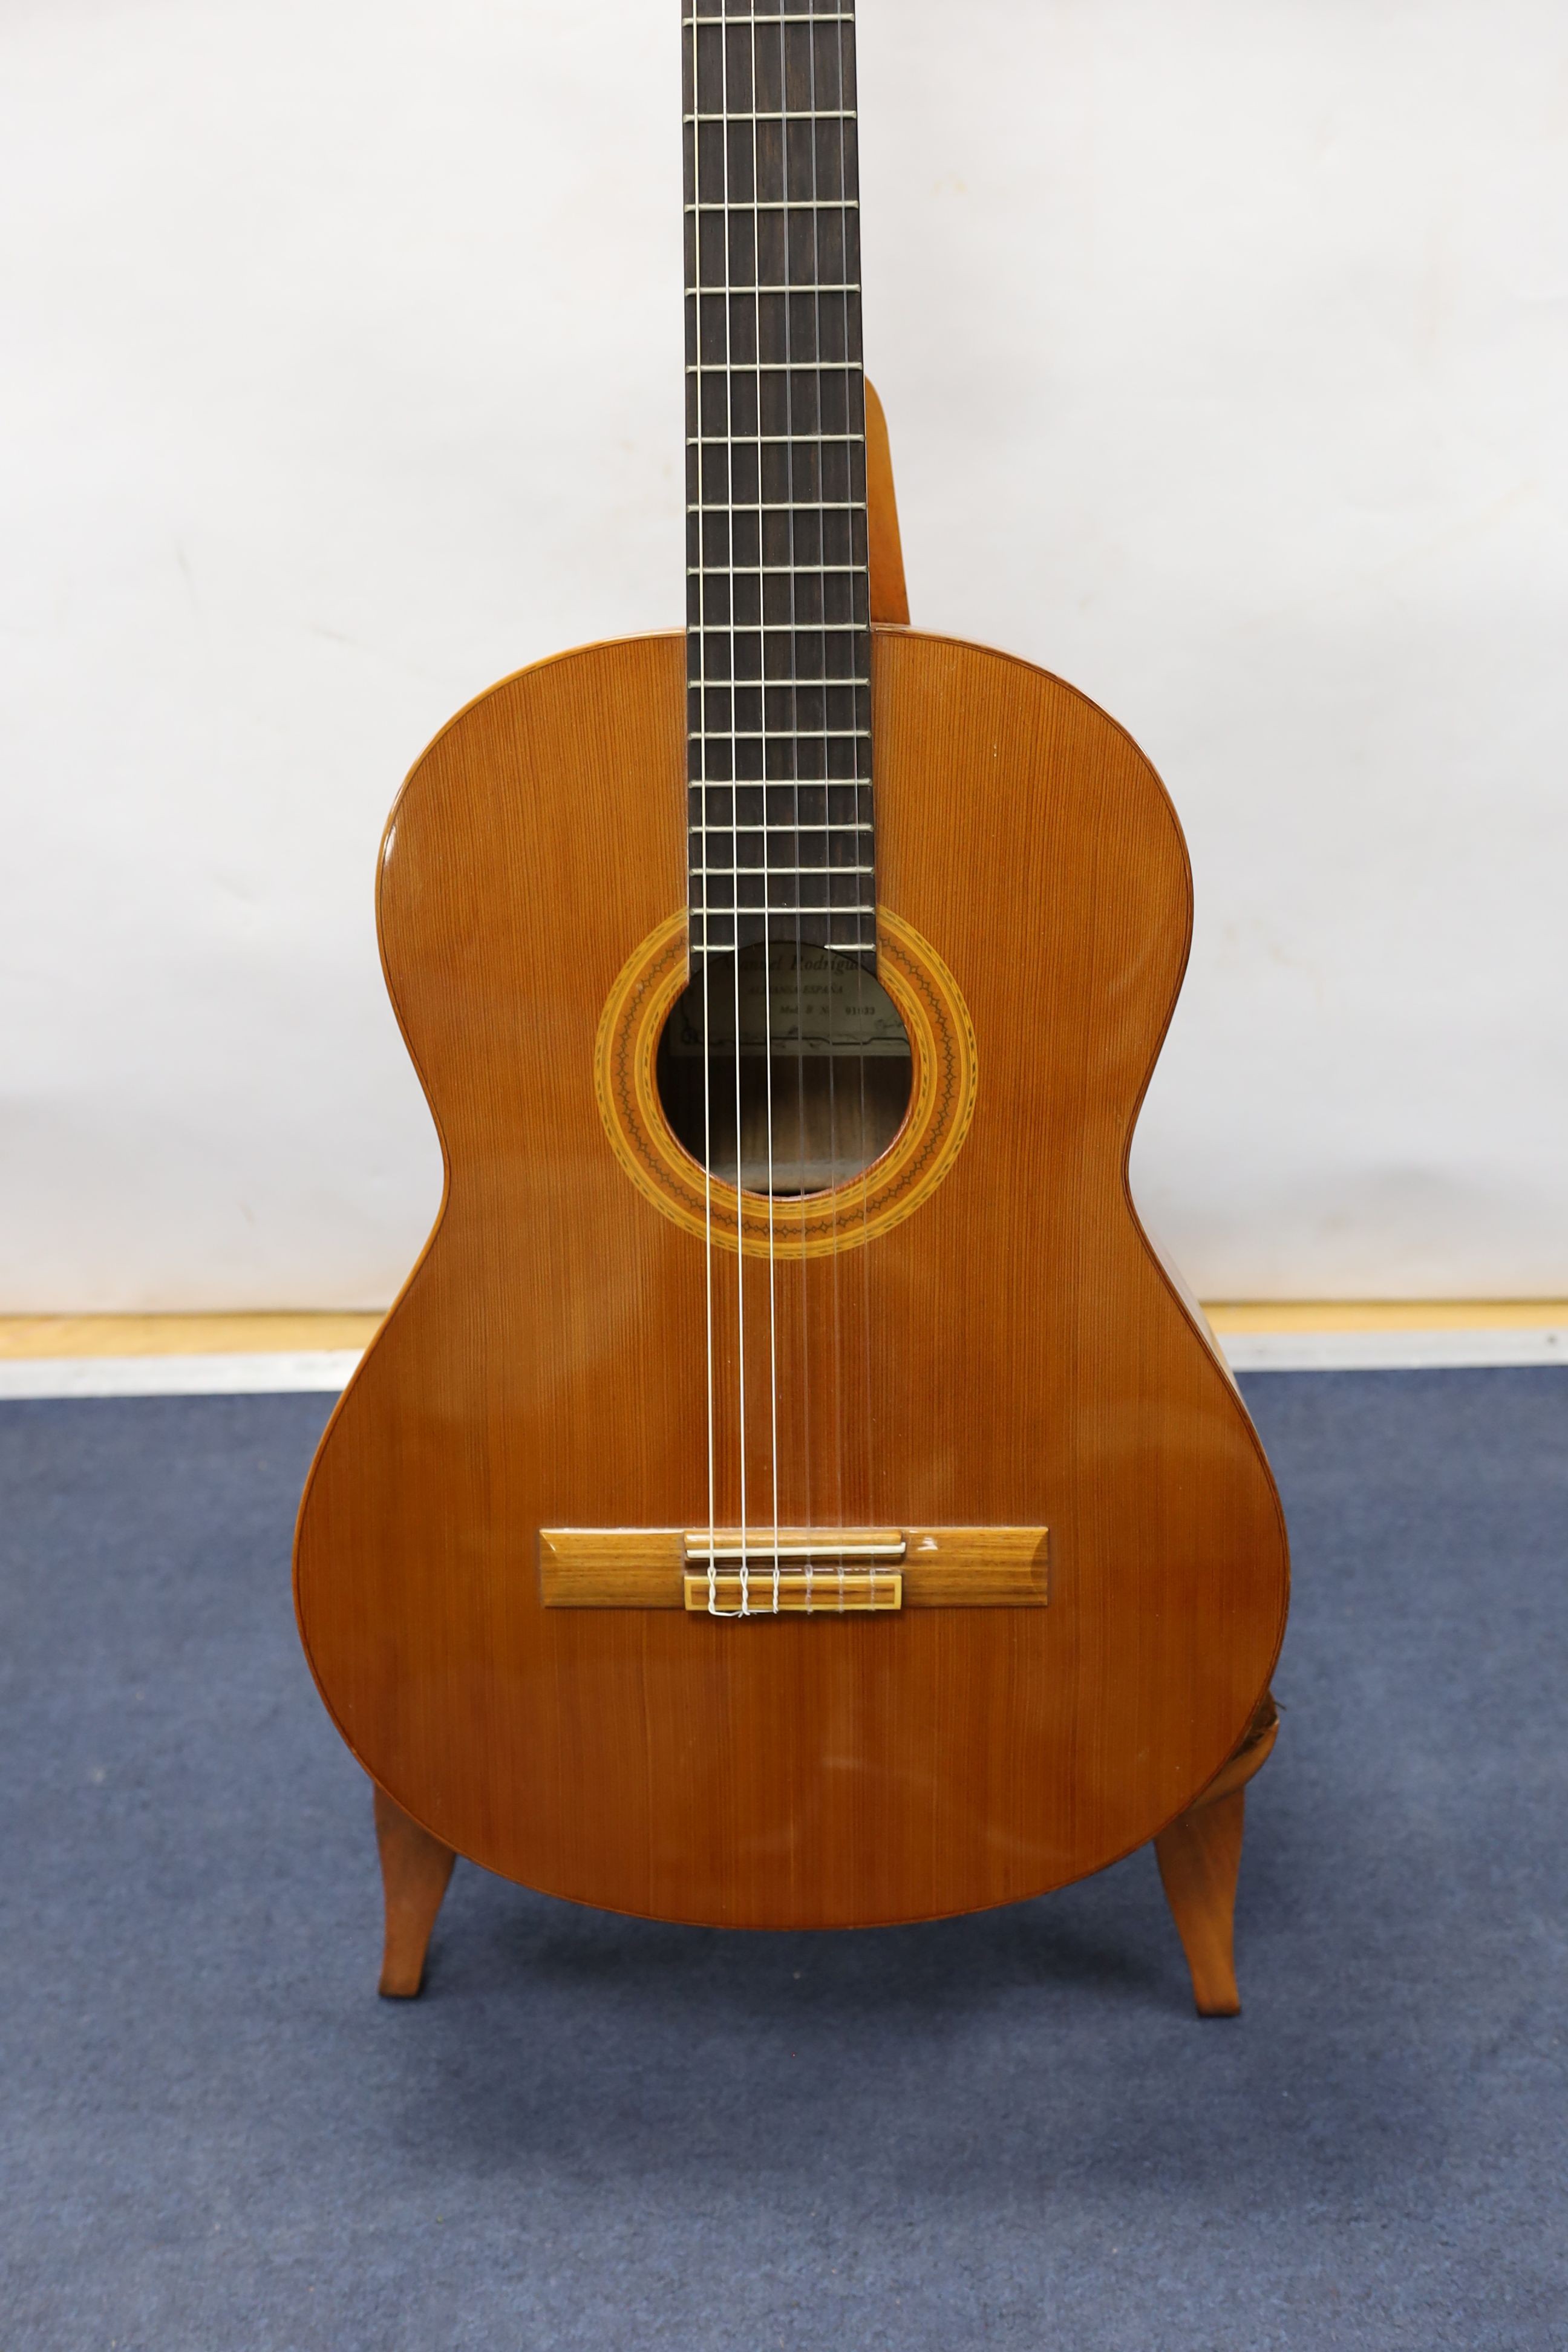 Manuel Rodriguez Model B Espana guitar with stand - Image 2 of 4